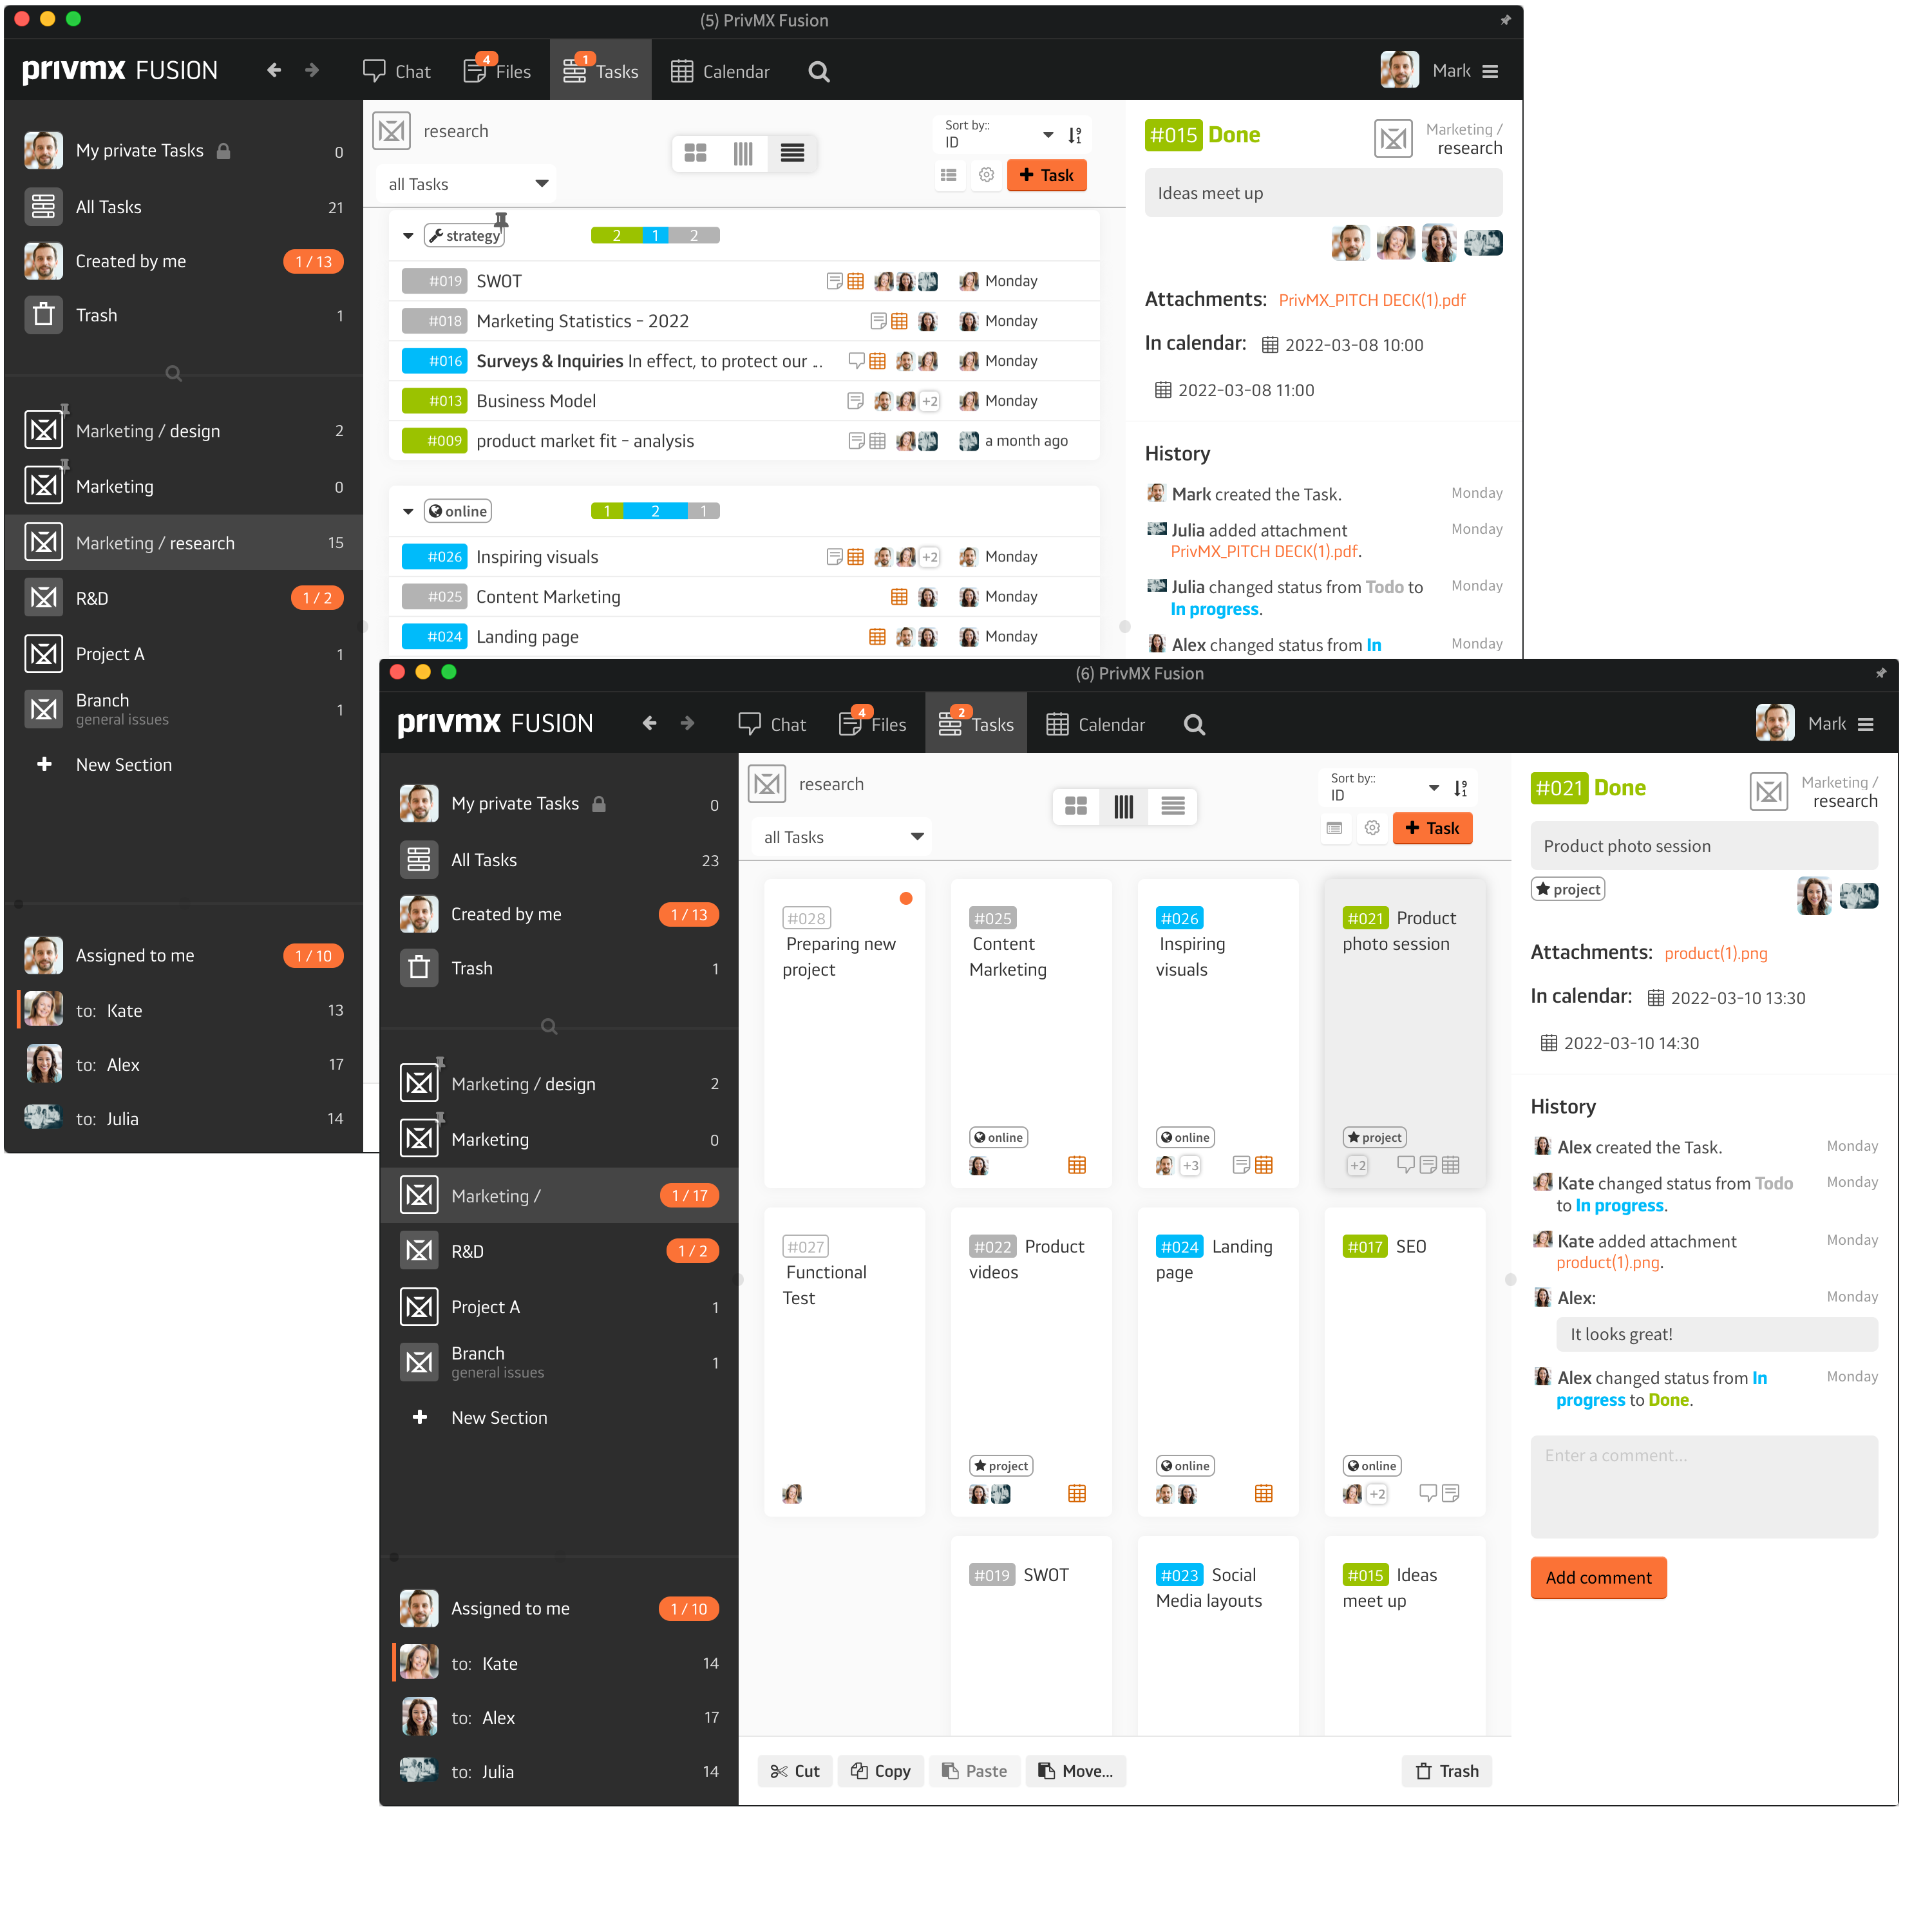 Task management integrated with Calendar, Files, Communication Tools and Sections